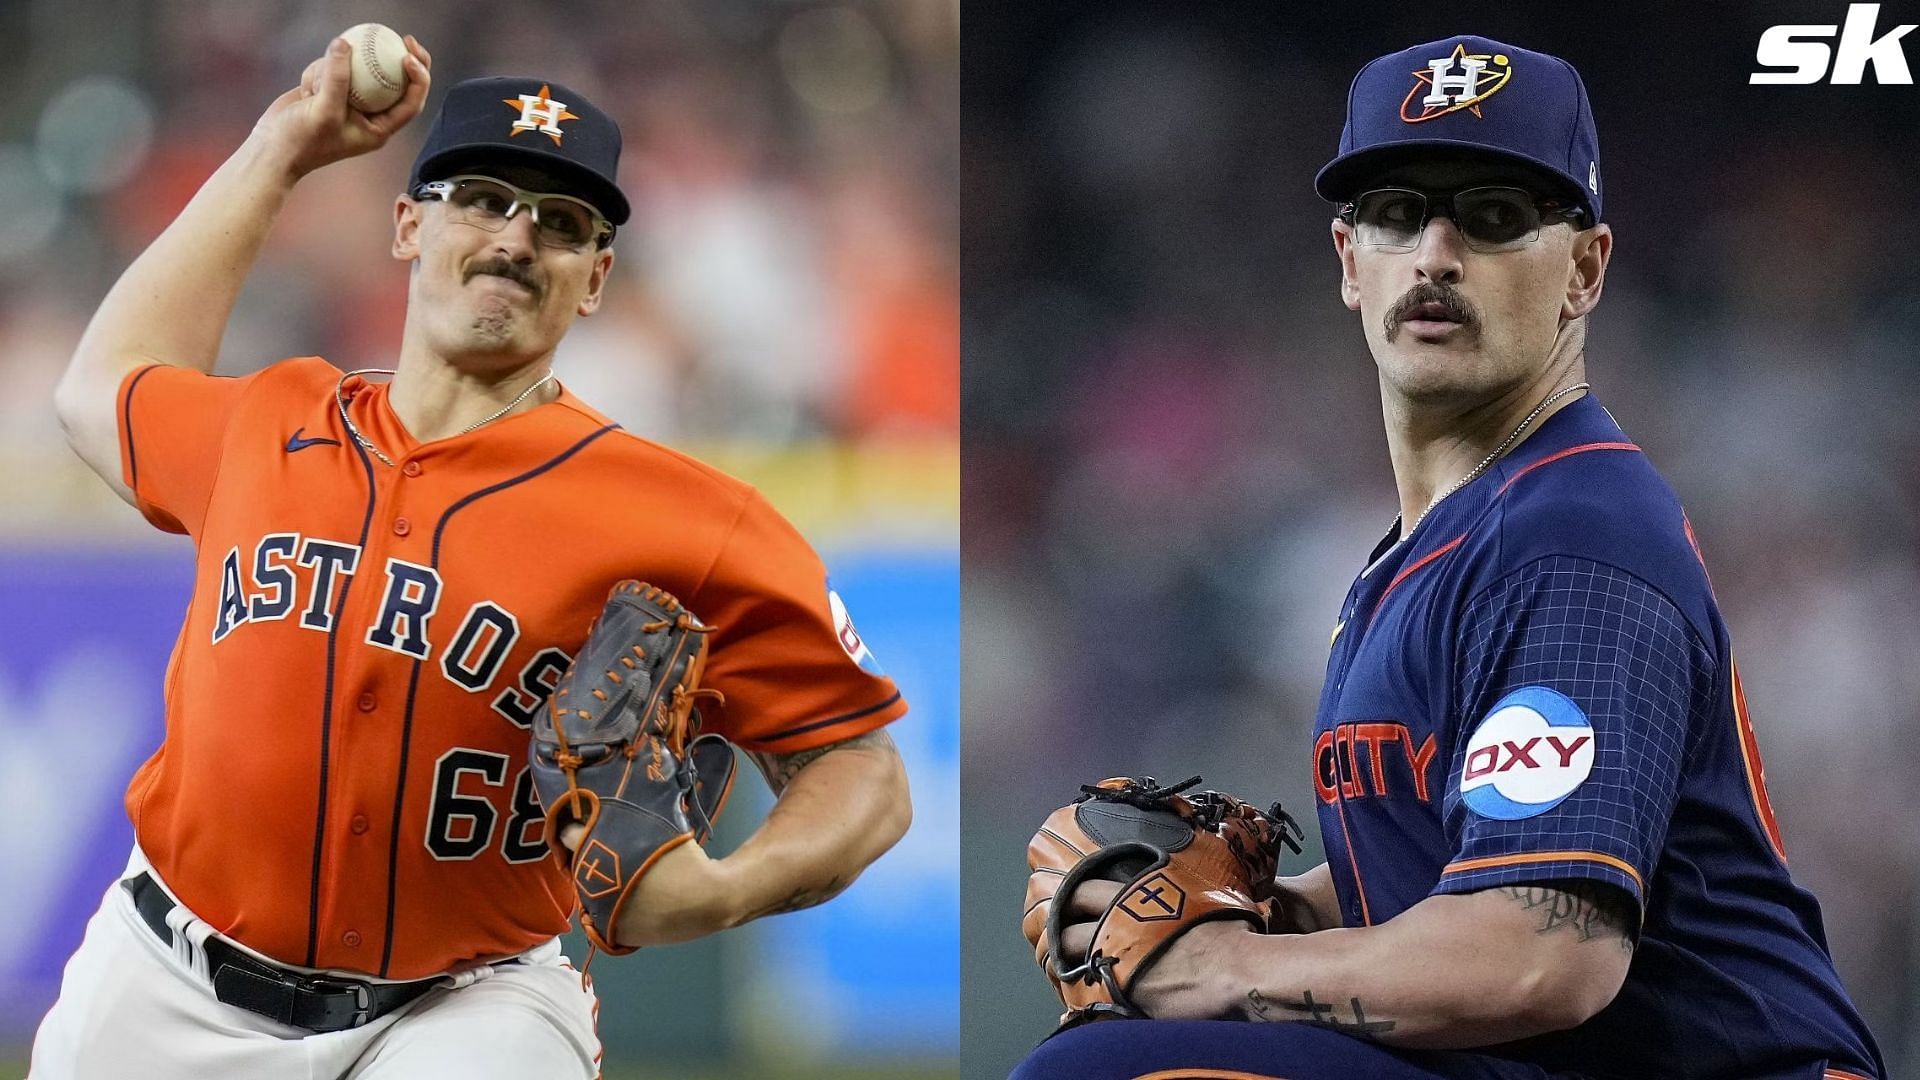 Jonathan Patrick France is turning heads with the Houston Astros